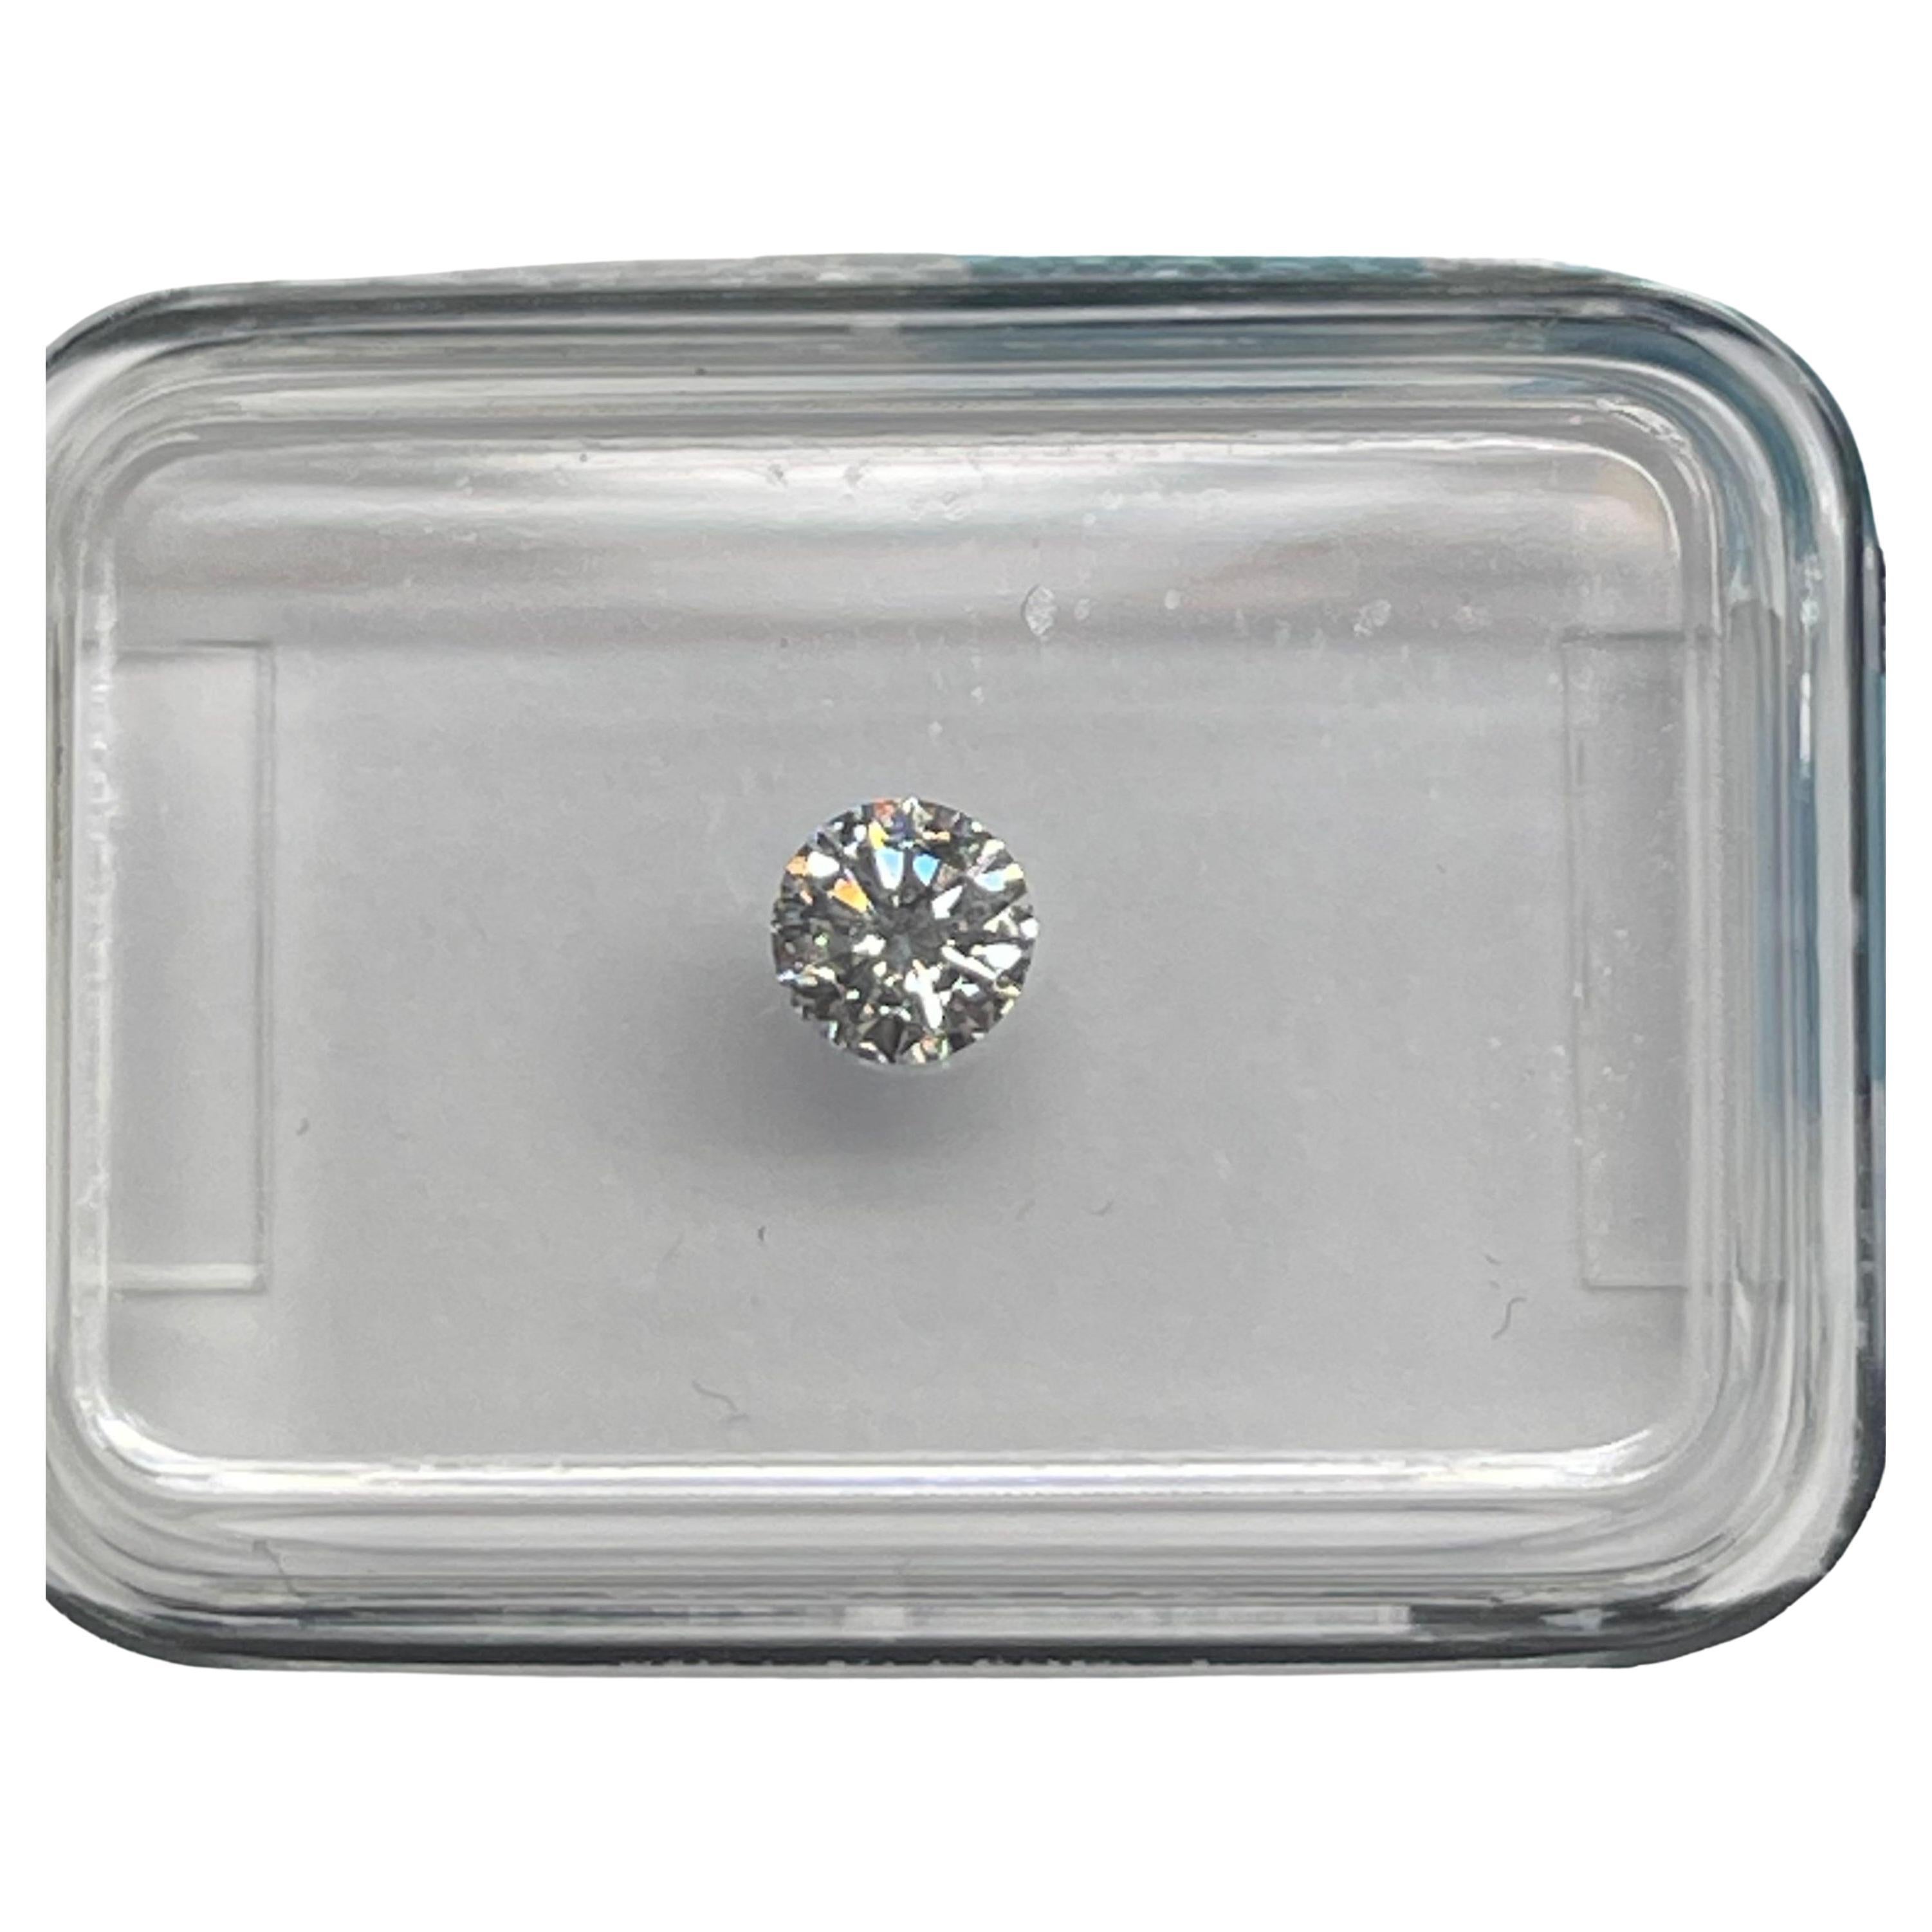 Natural Diamond graded by IGI.

Shape: Round Brilliant
Weight: 0.23CT
Color: E
Clarity: SI1
Cut: Very Good
Polish: Excellent
Symmetry: Excellent
Fluorescence: Very Slight
inscription : IGI 630434189